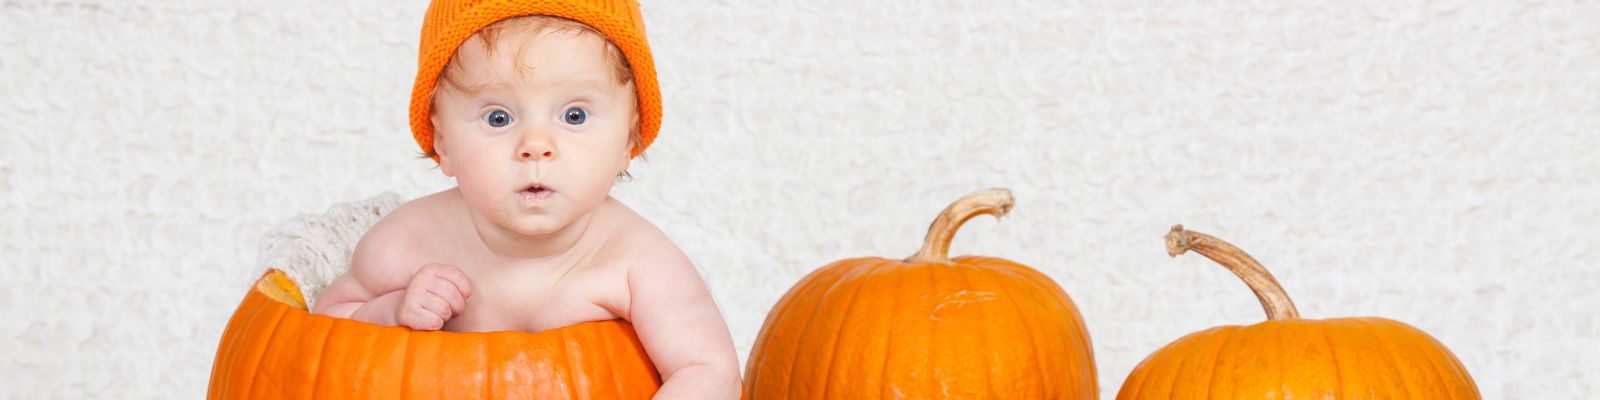 Costume Ideas For Your Tiny Trick-Or-Treater